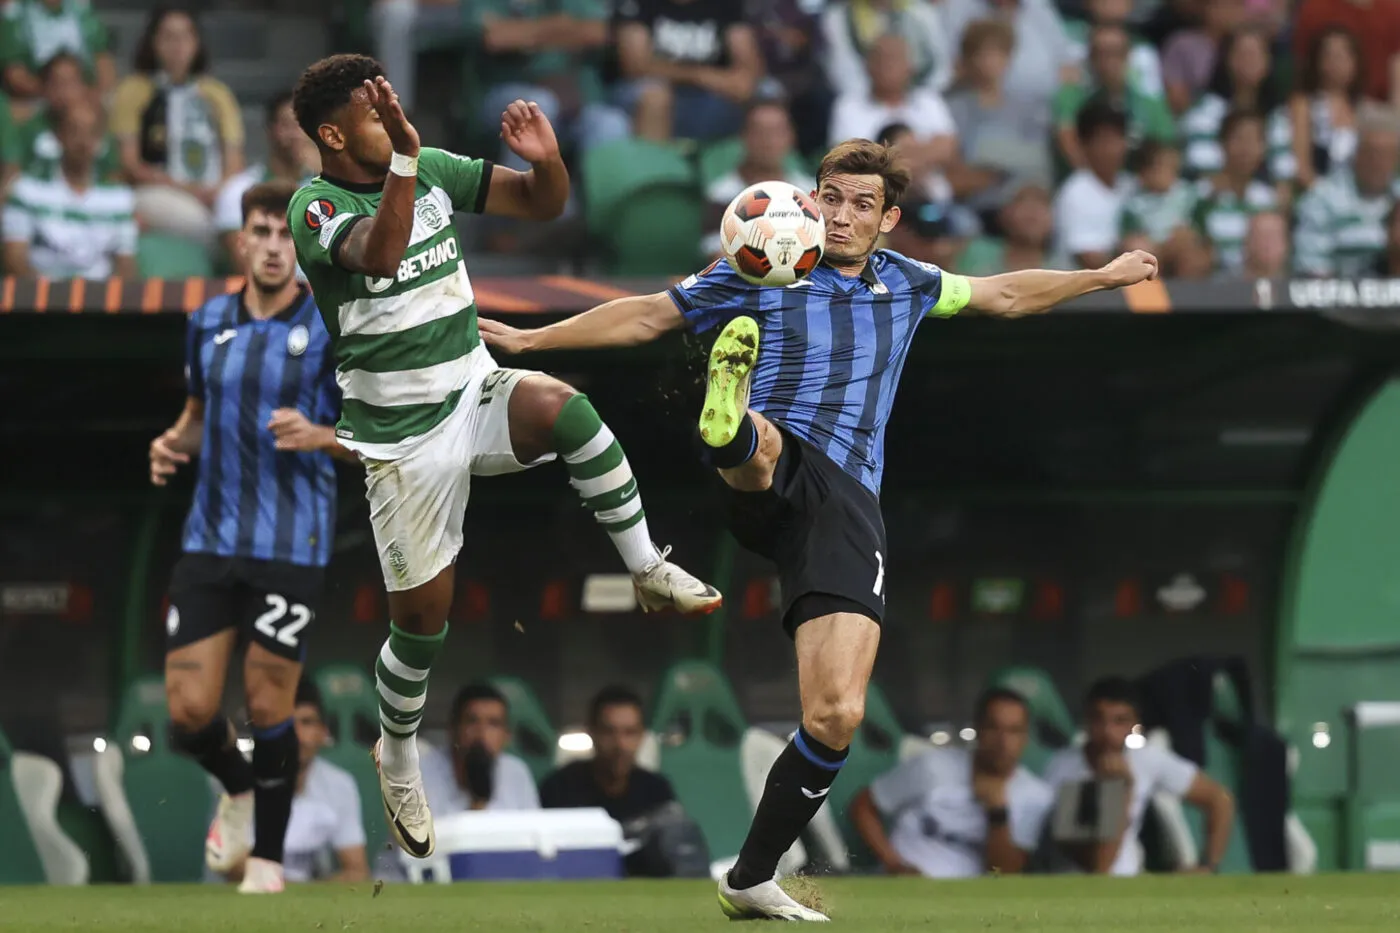 Lisbon, 10/05/2023 - Sporting Clube de Portugal hosted Atalanta Bergamasca Calcio this afternoon at the Alvalade Stadium, in a game counting for the 2nd round of the 2023/24 Europa League group stage. Marcus Edwards and Marten de Roon (Filipe Amorim / Global Imagens) - Photo by Icon sport